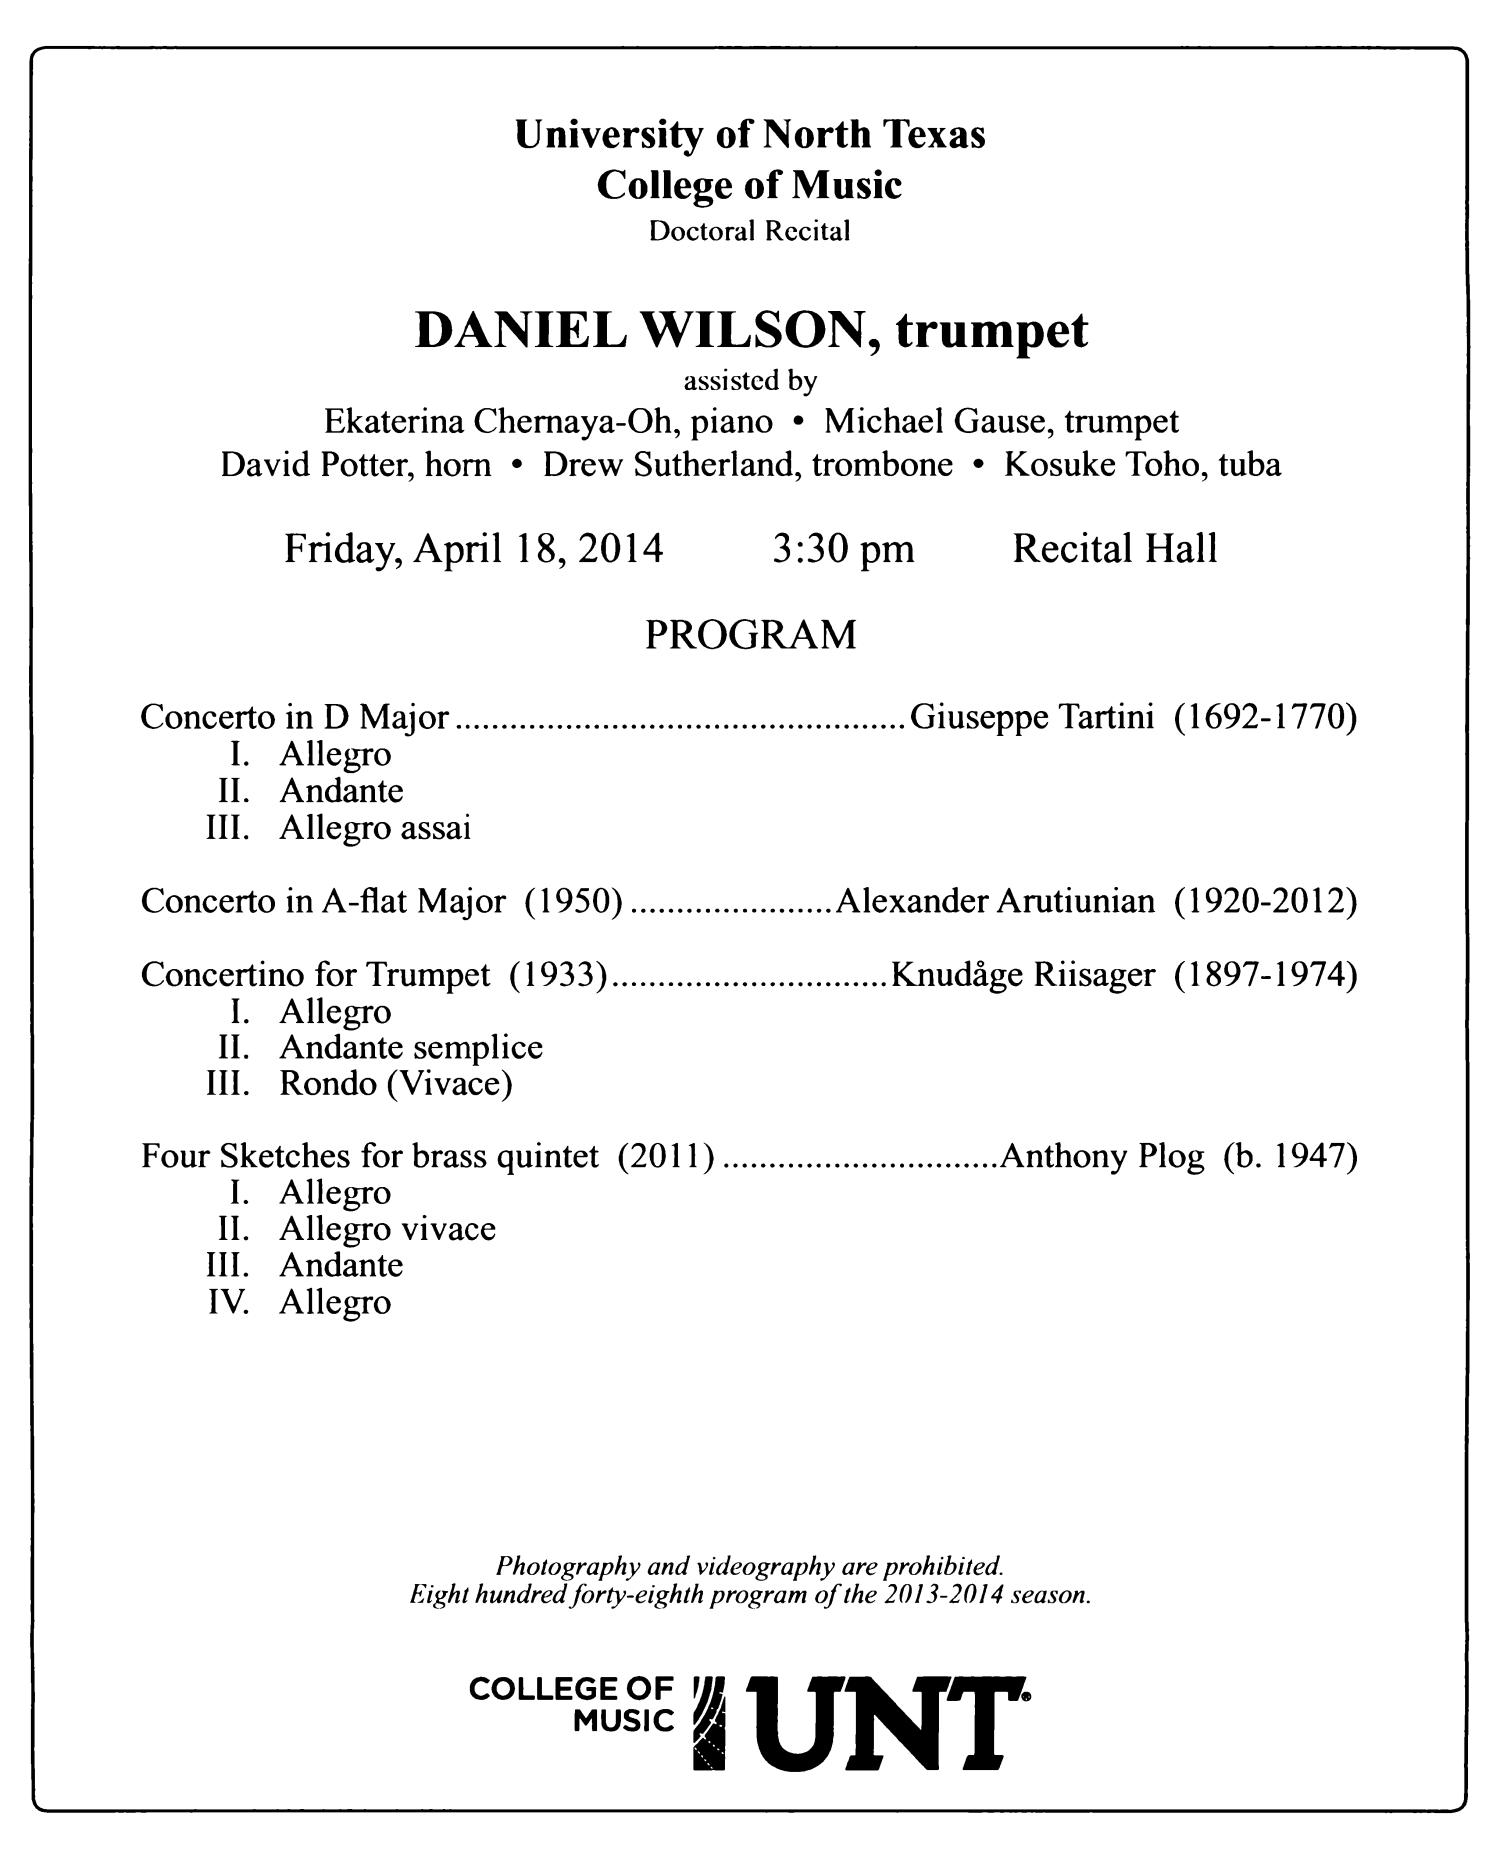 College of Music Program Book 2013-2014: Student Performances, Volume 2
                                                
                                                    [Sequence #]: 272 of 415
                                                